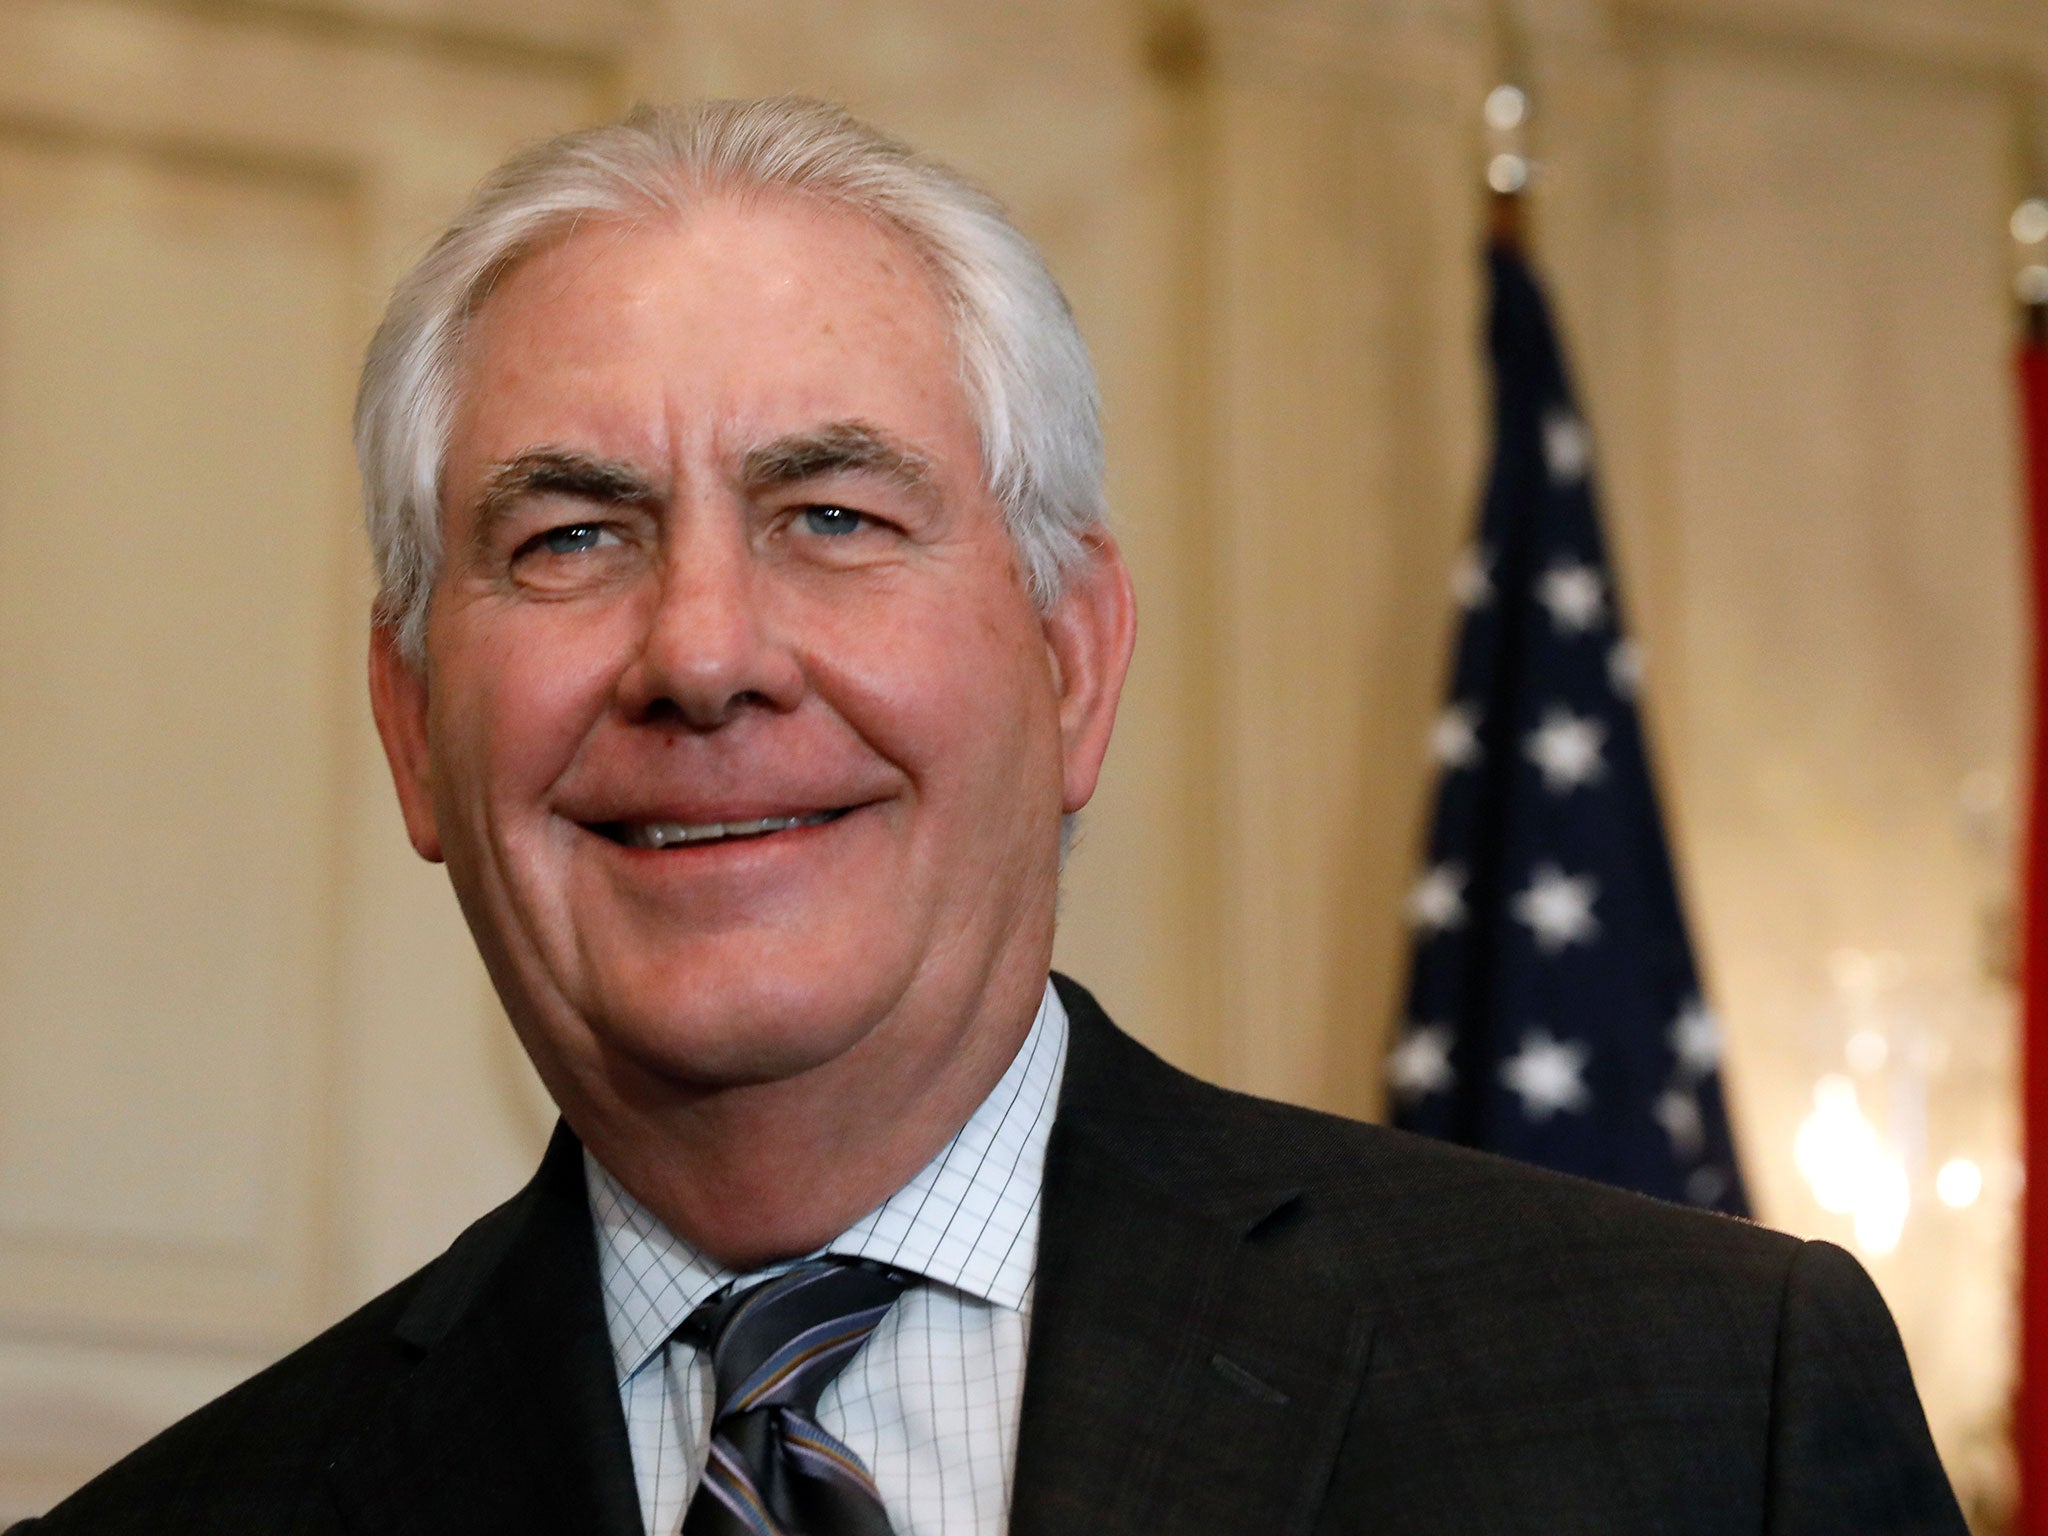 Rex Tillerson and the company he used to run, Exxon Mobil, both want the US to remain in the Paris Agreement